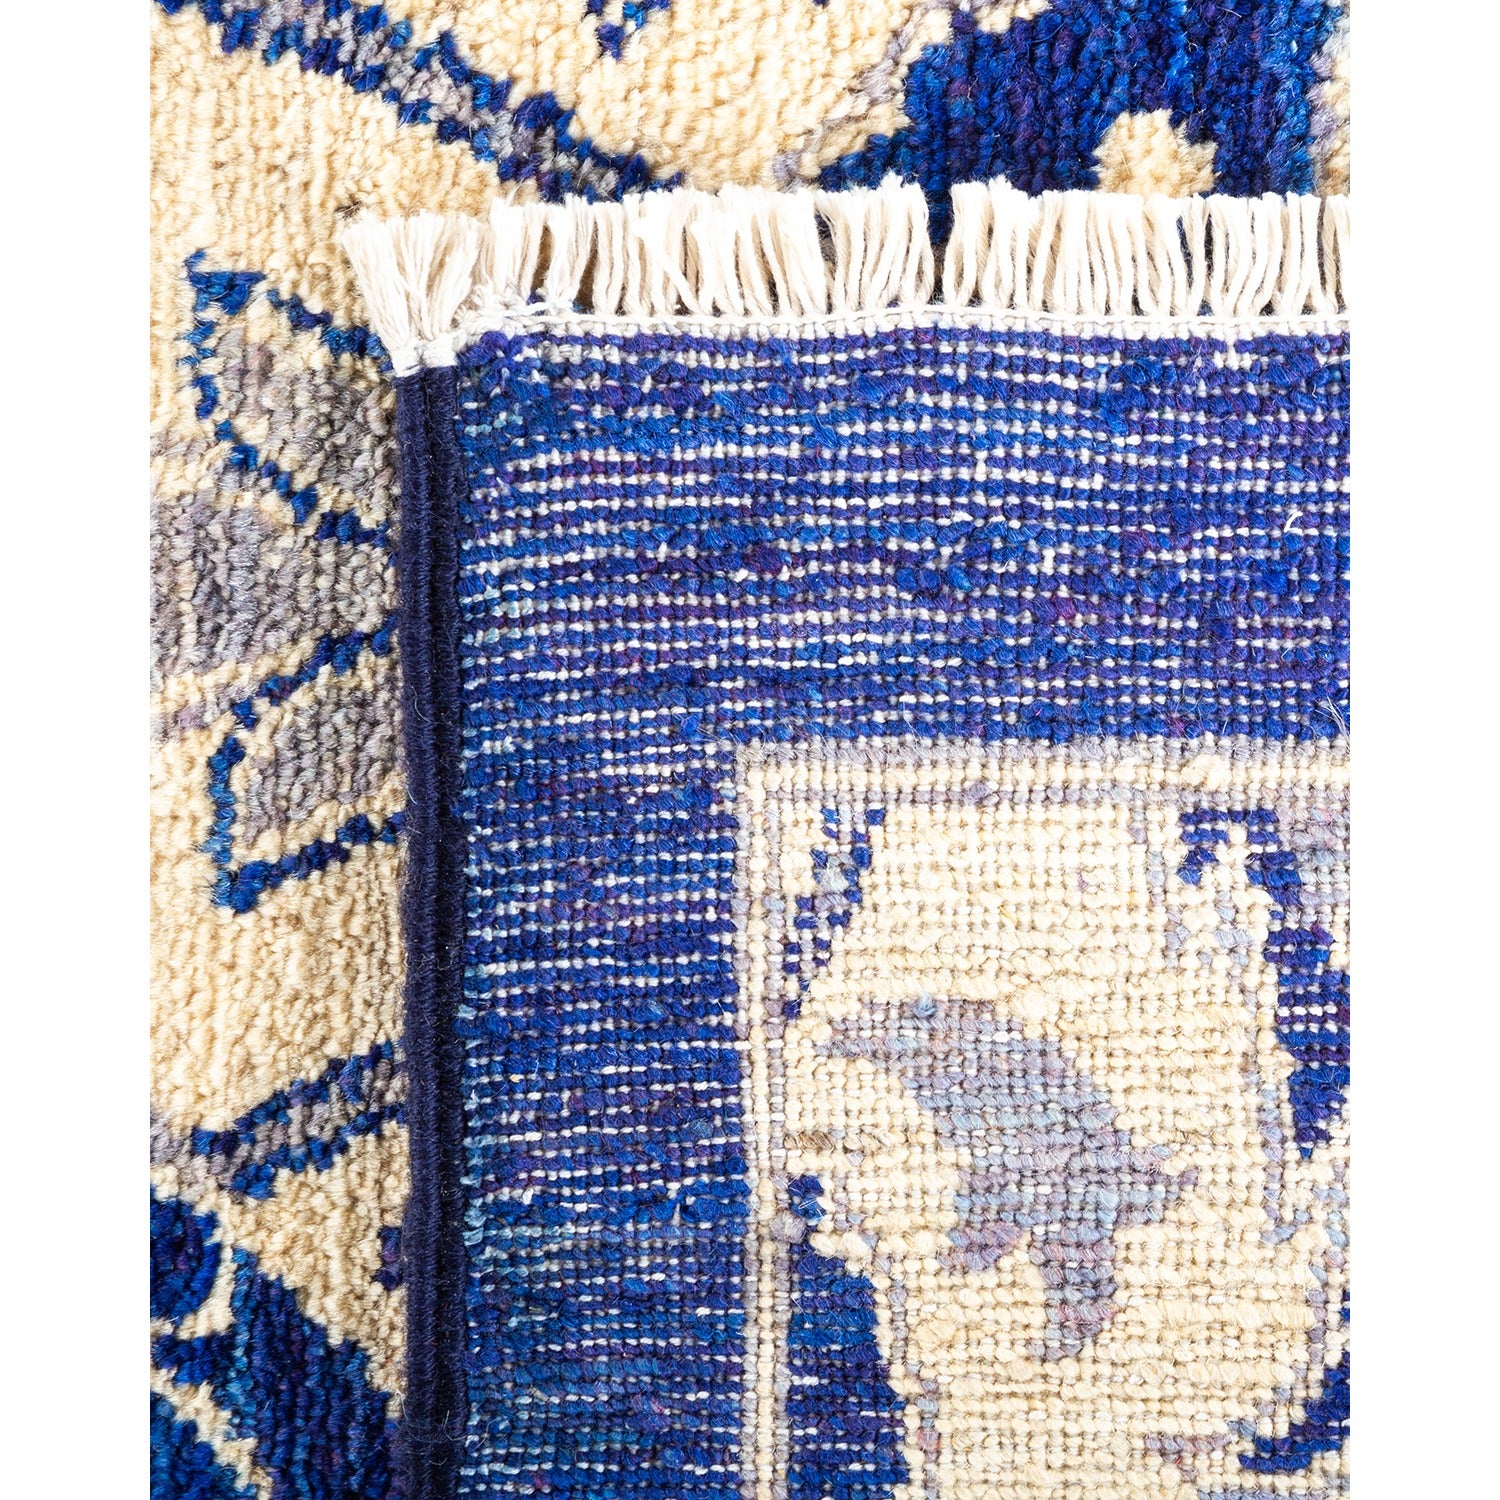 Intricate handwoven rug with geometric patterns in blue and cream.